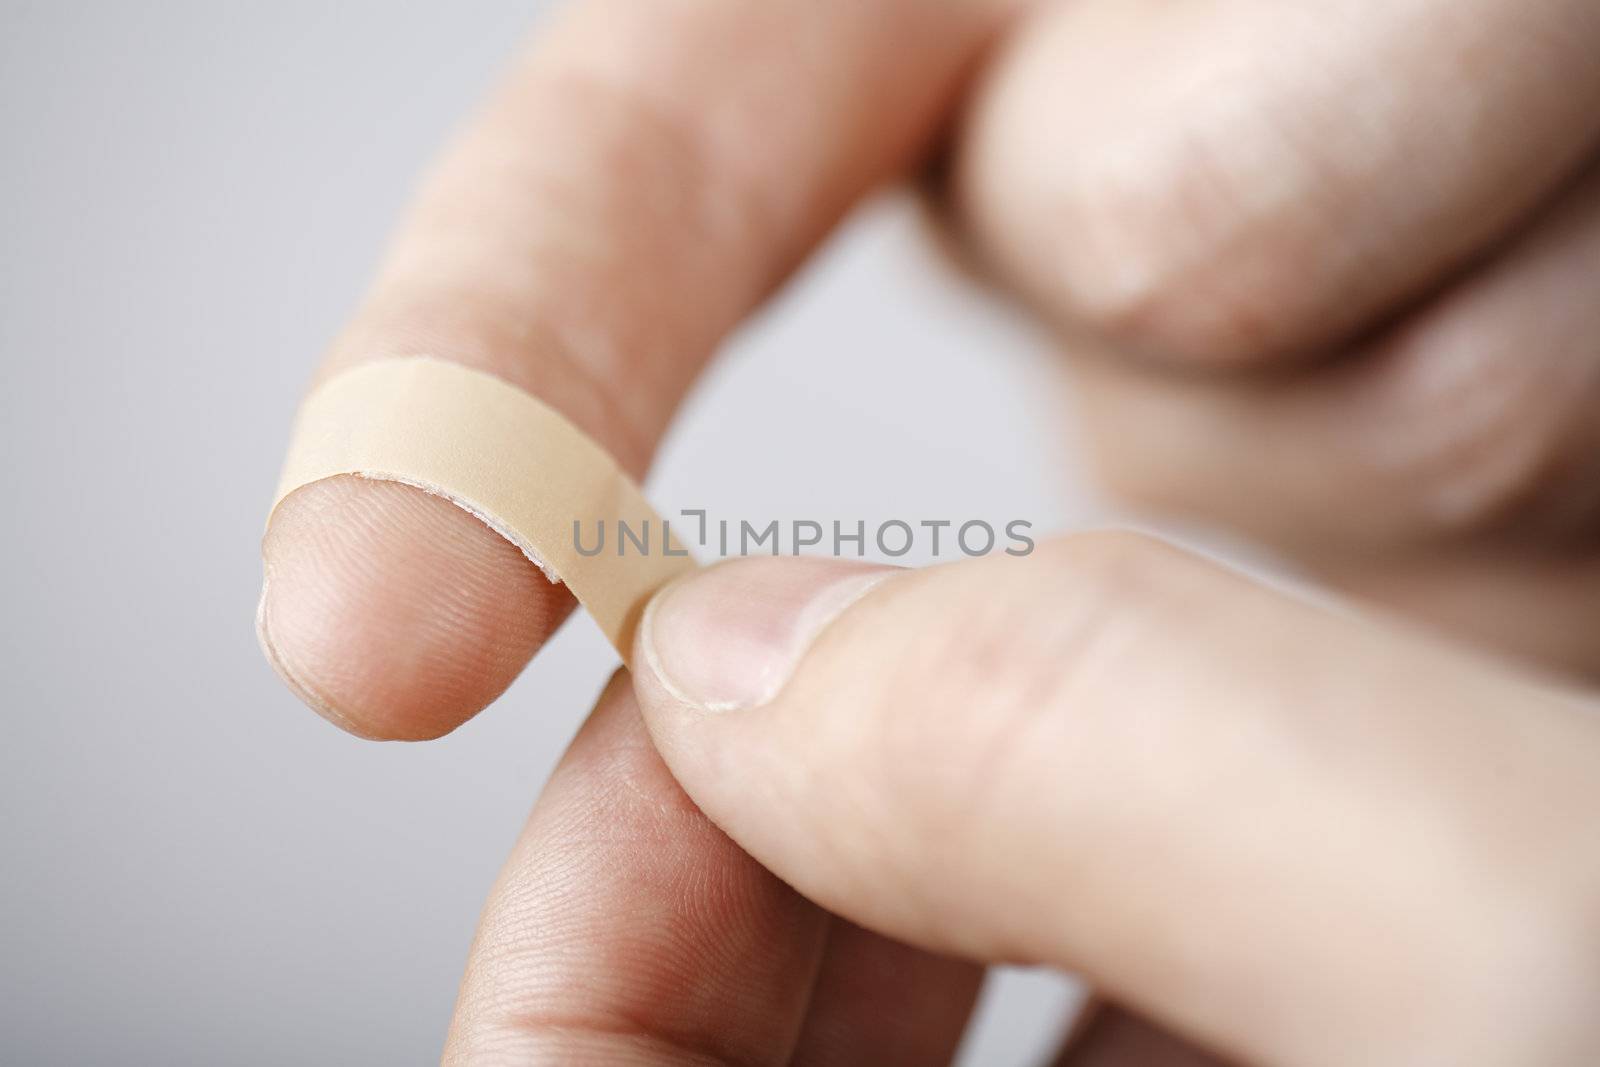 Putting a small adhesive,bandage on a finger. Very short depth-of-field.